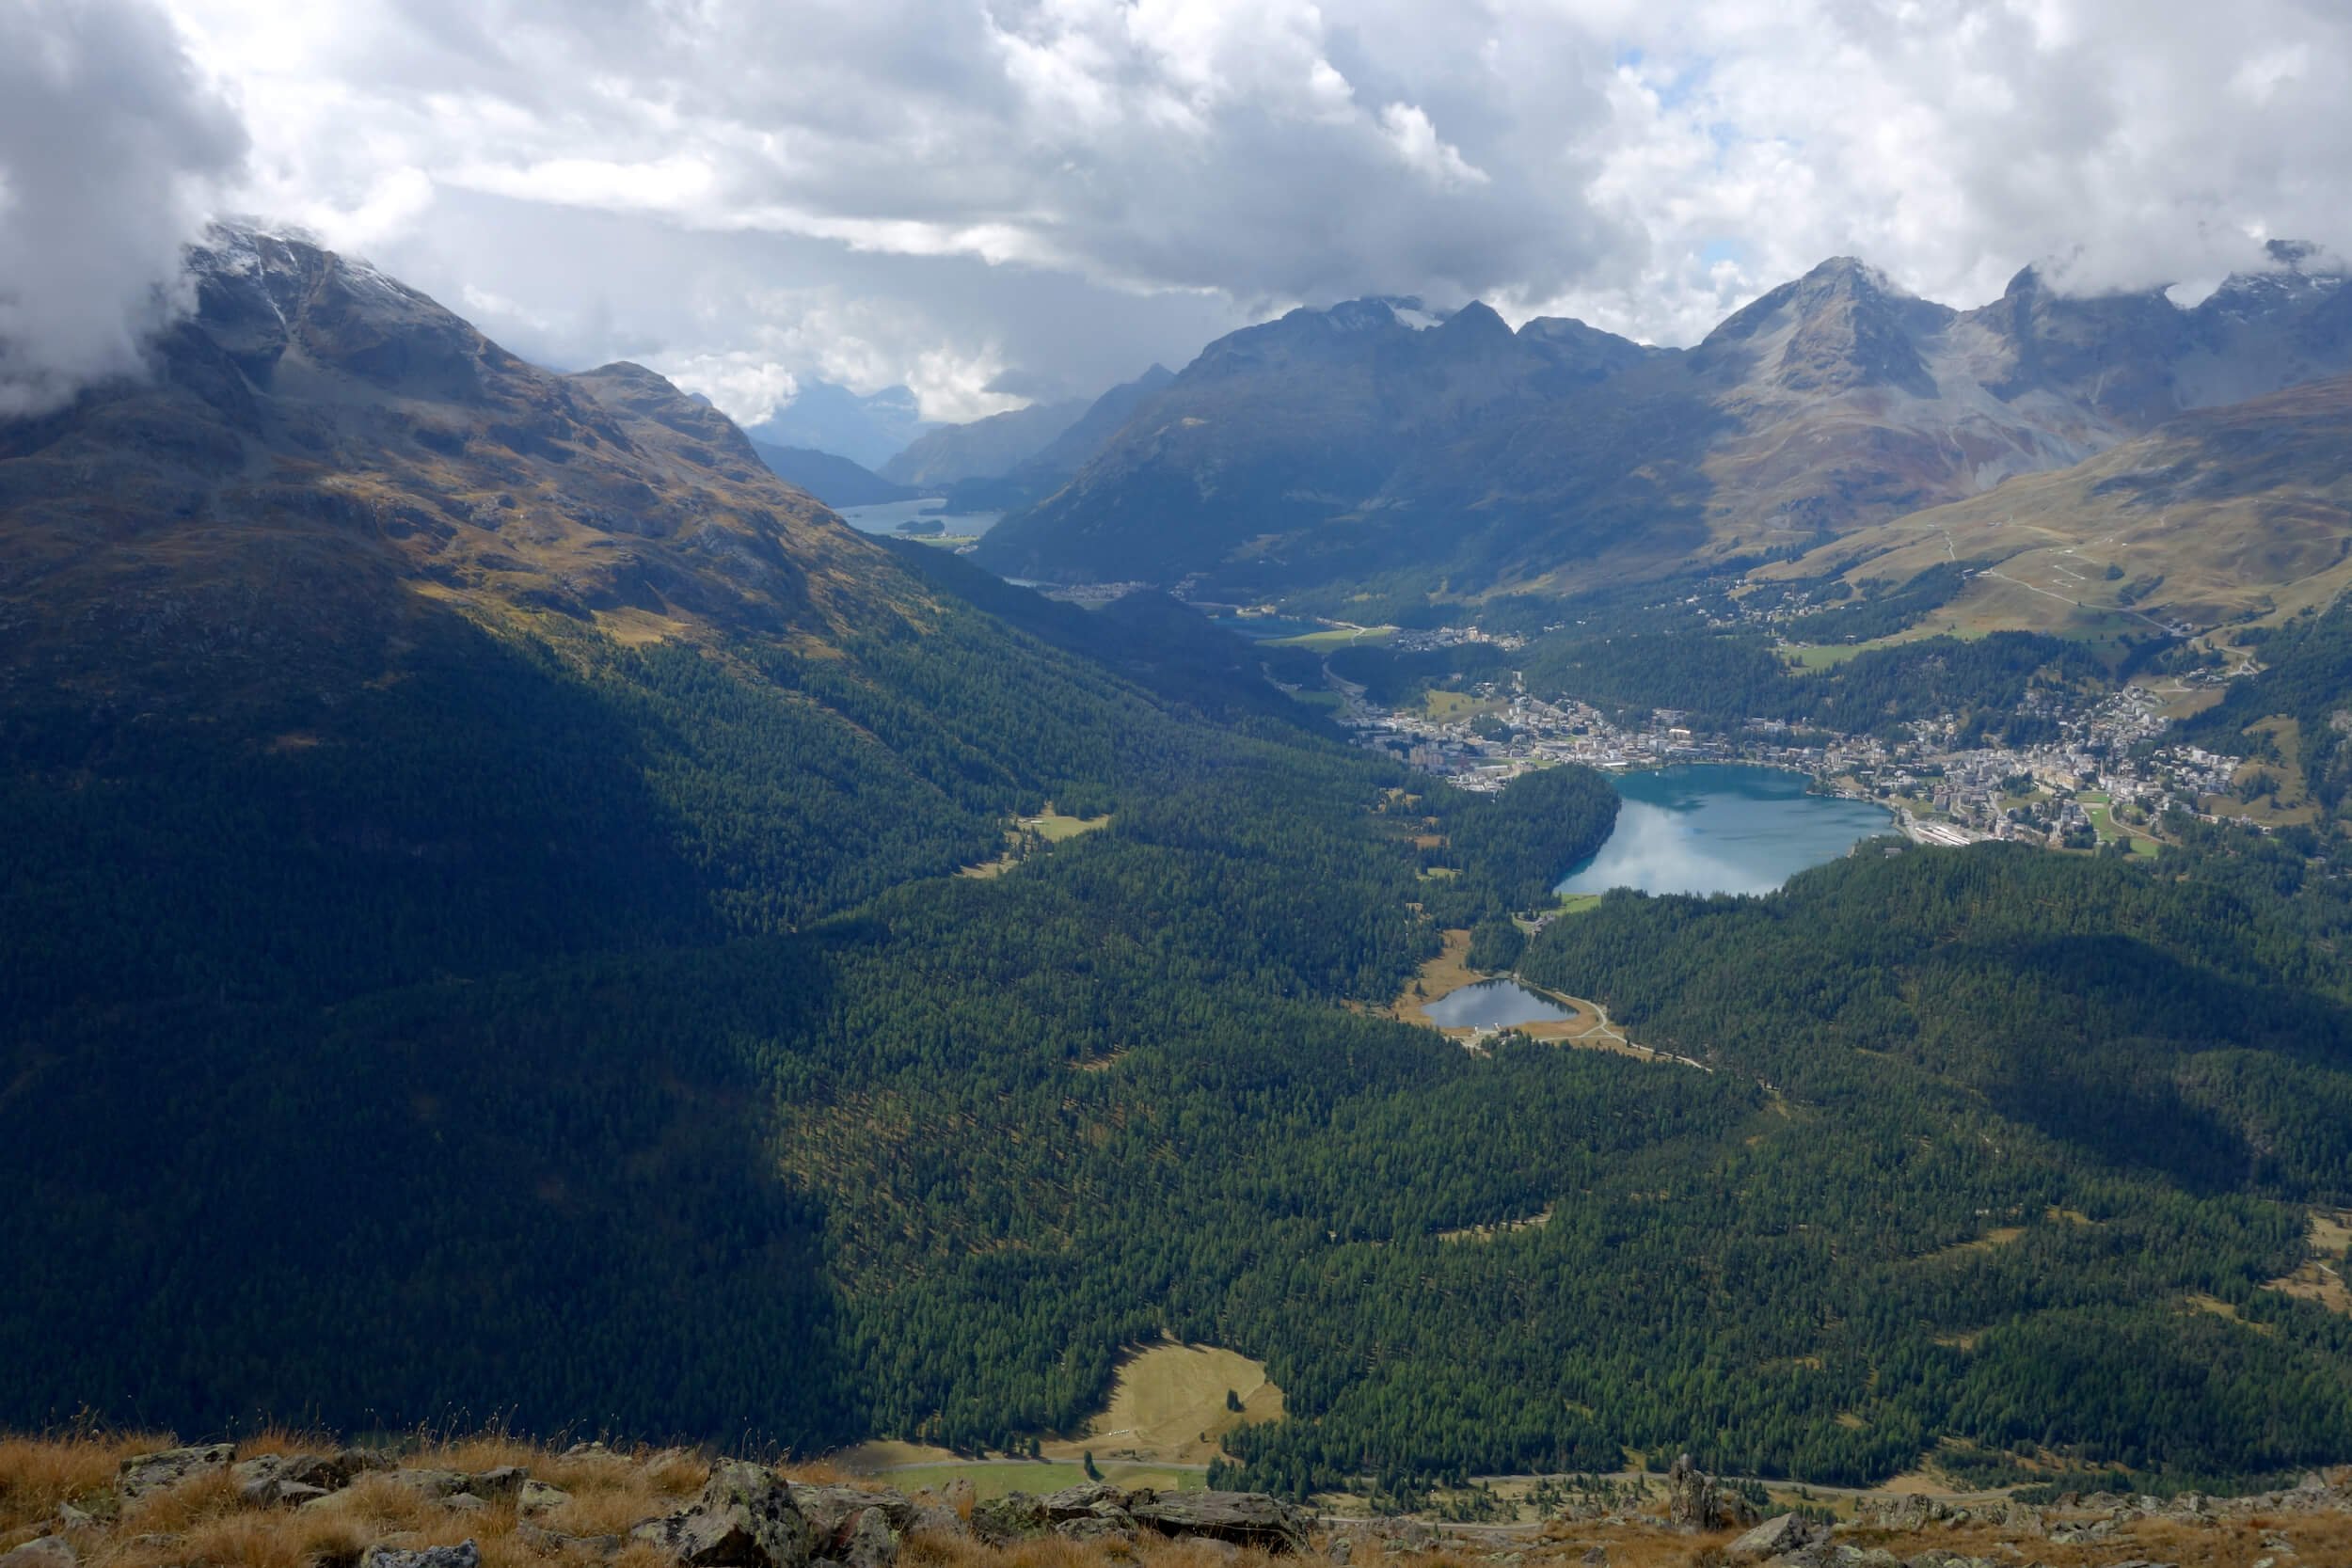 The view of the Engadin from Paradis Hütte